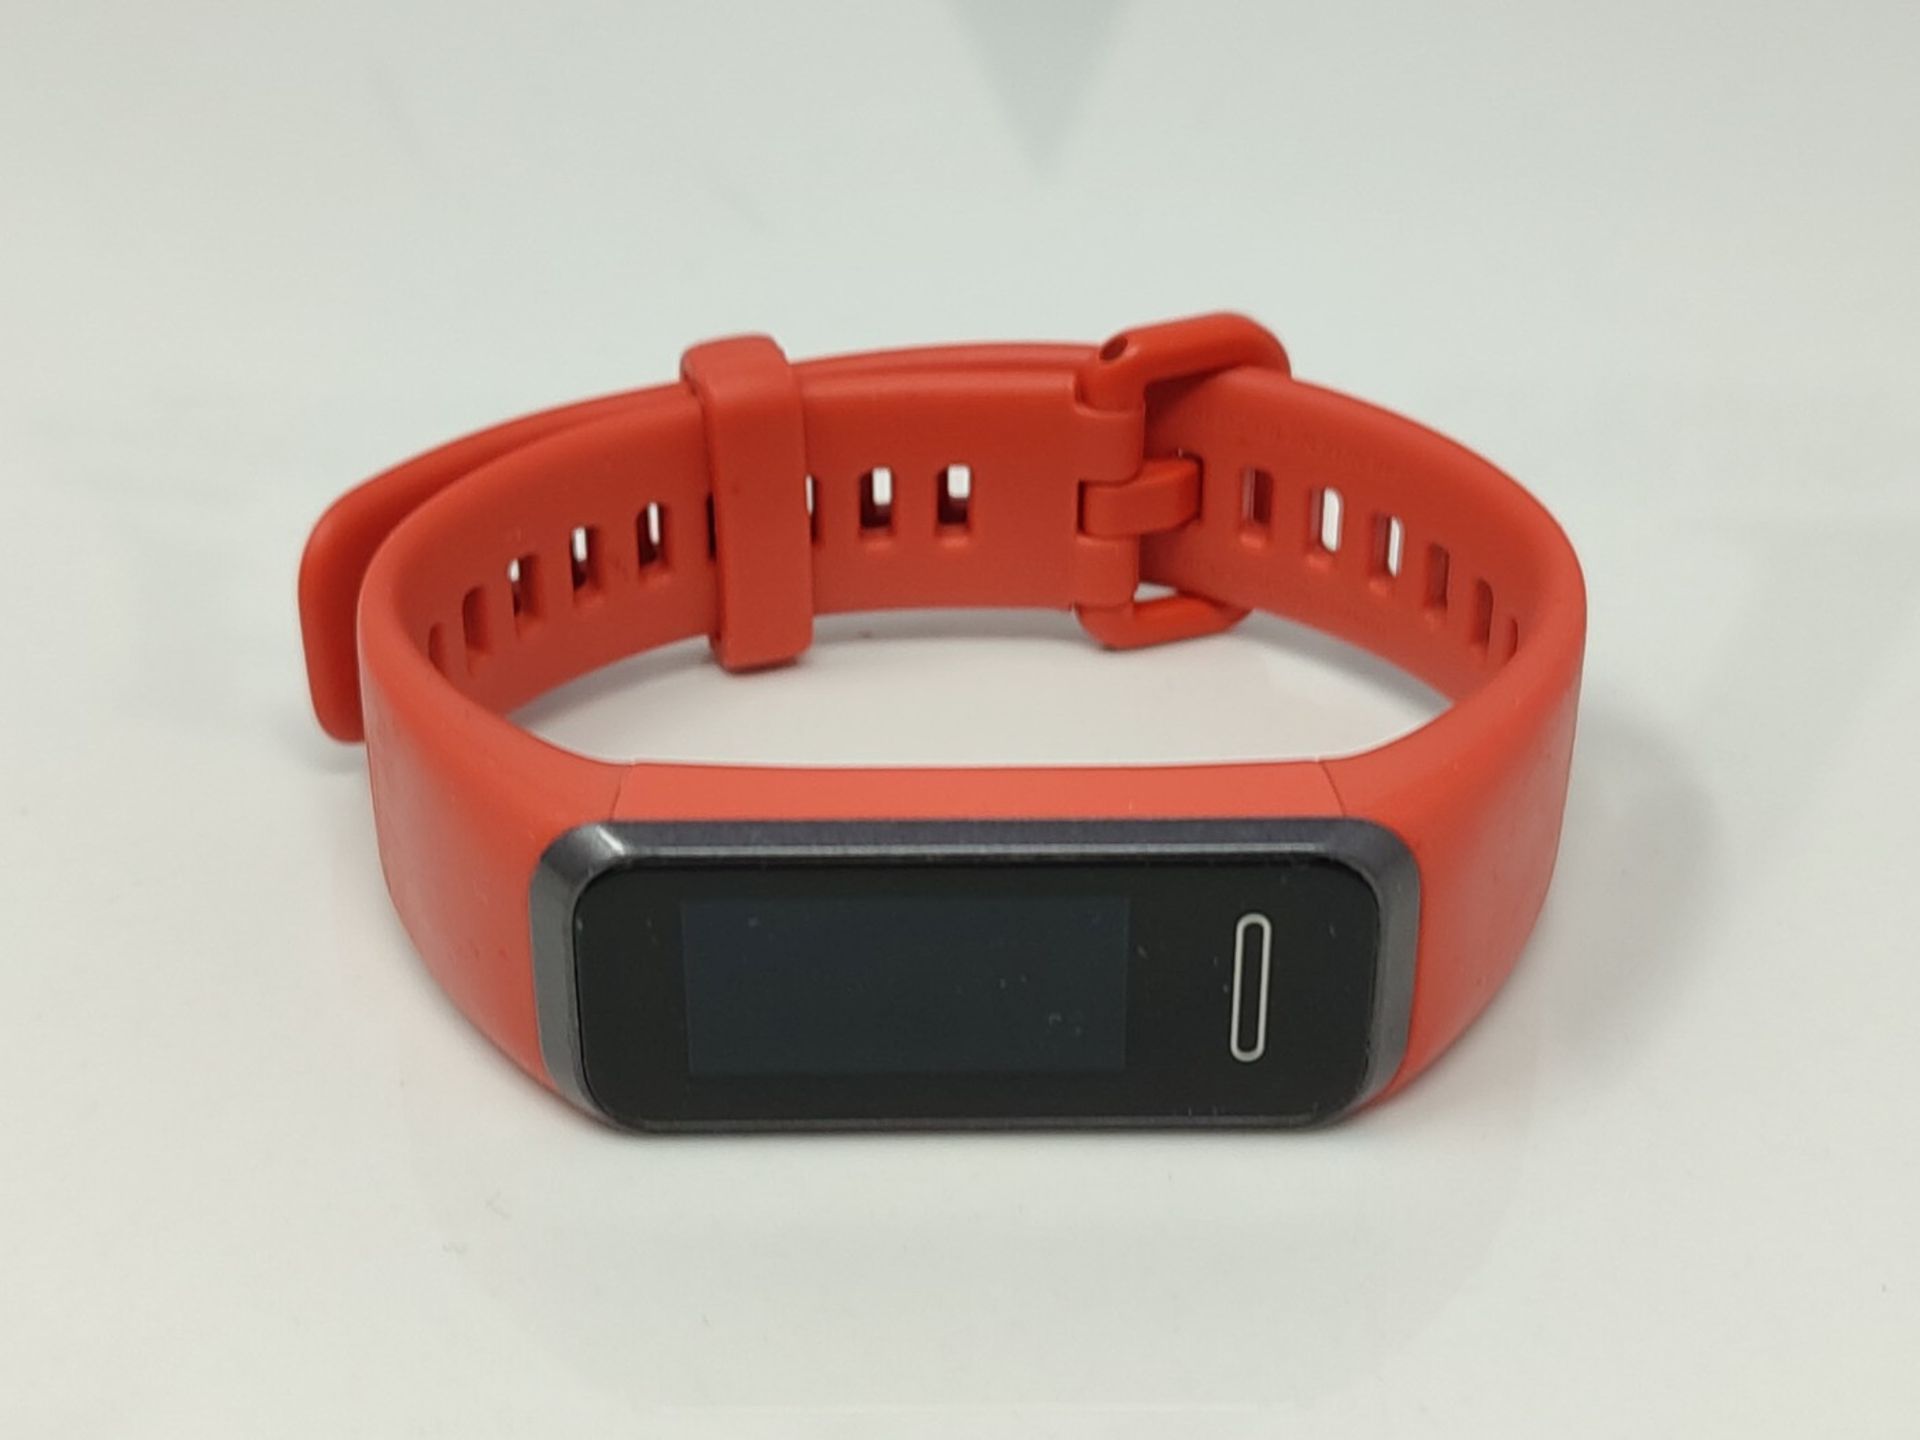 HUAWEI Band 4 Smart Band, Fitness Activities Tracker with 0.96" Color Screen, 24/7 Con - Image 2 of 3